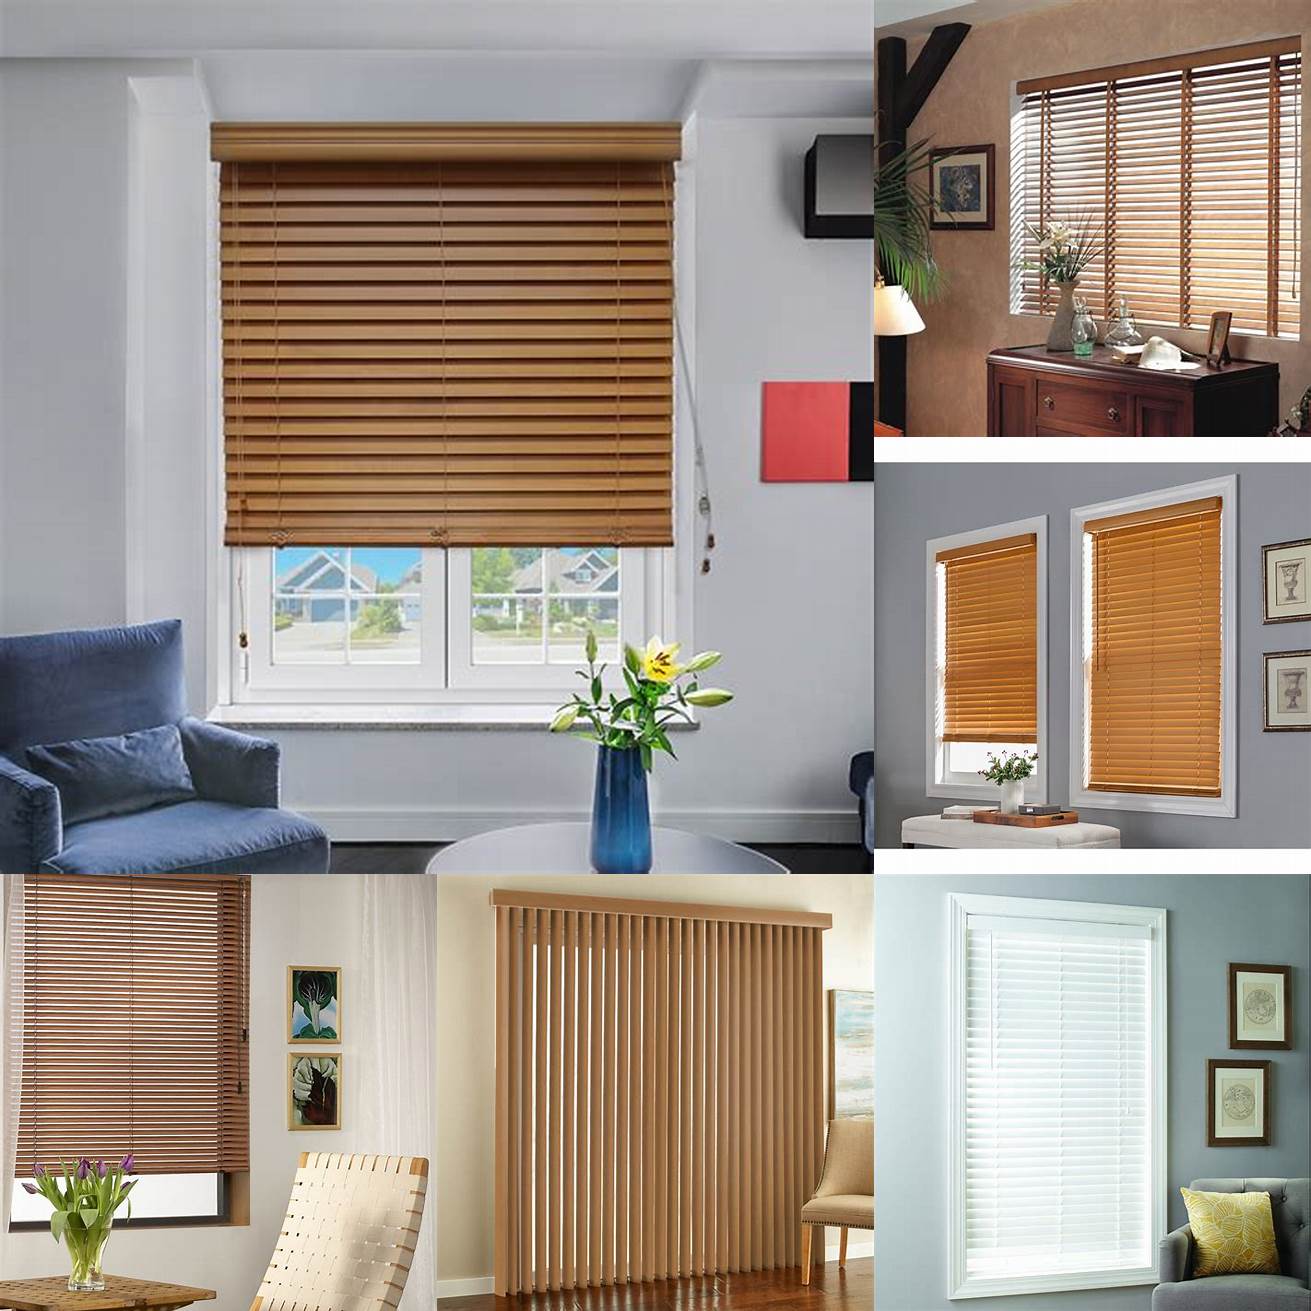 Blinds with Wooden Finish